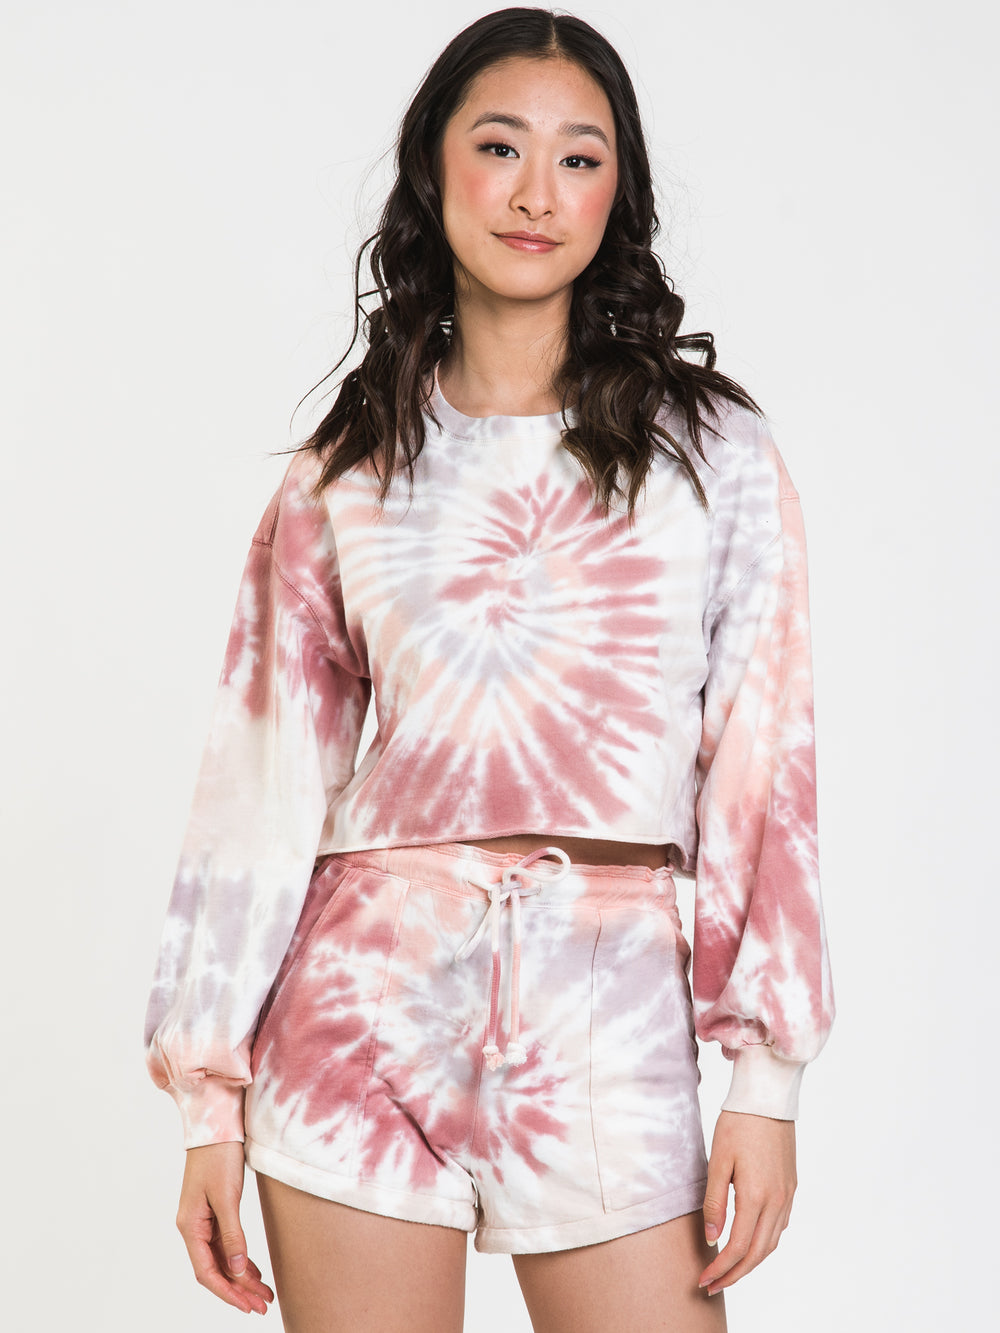 HARLOW GISELLE TIE DYE CROPPED CREW - CLEARANCE